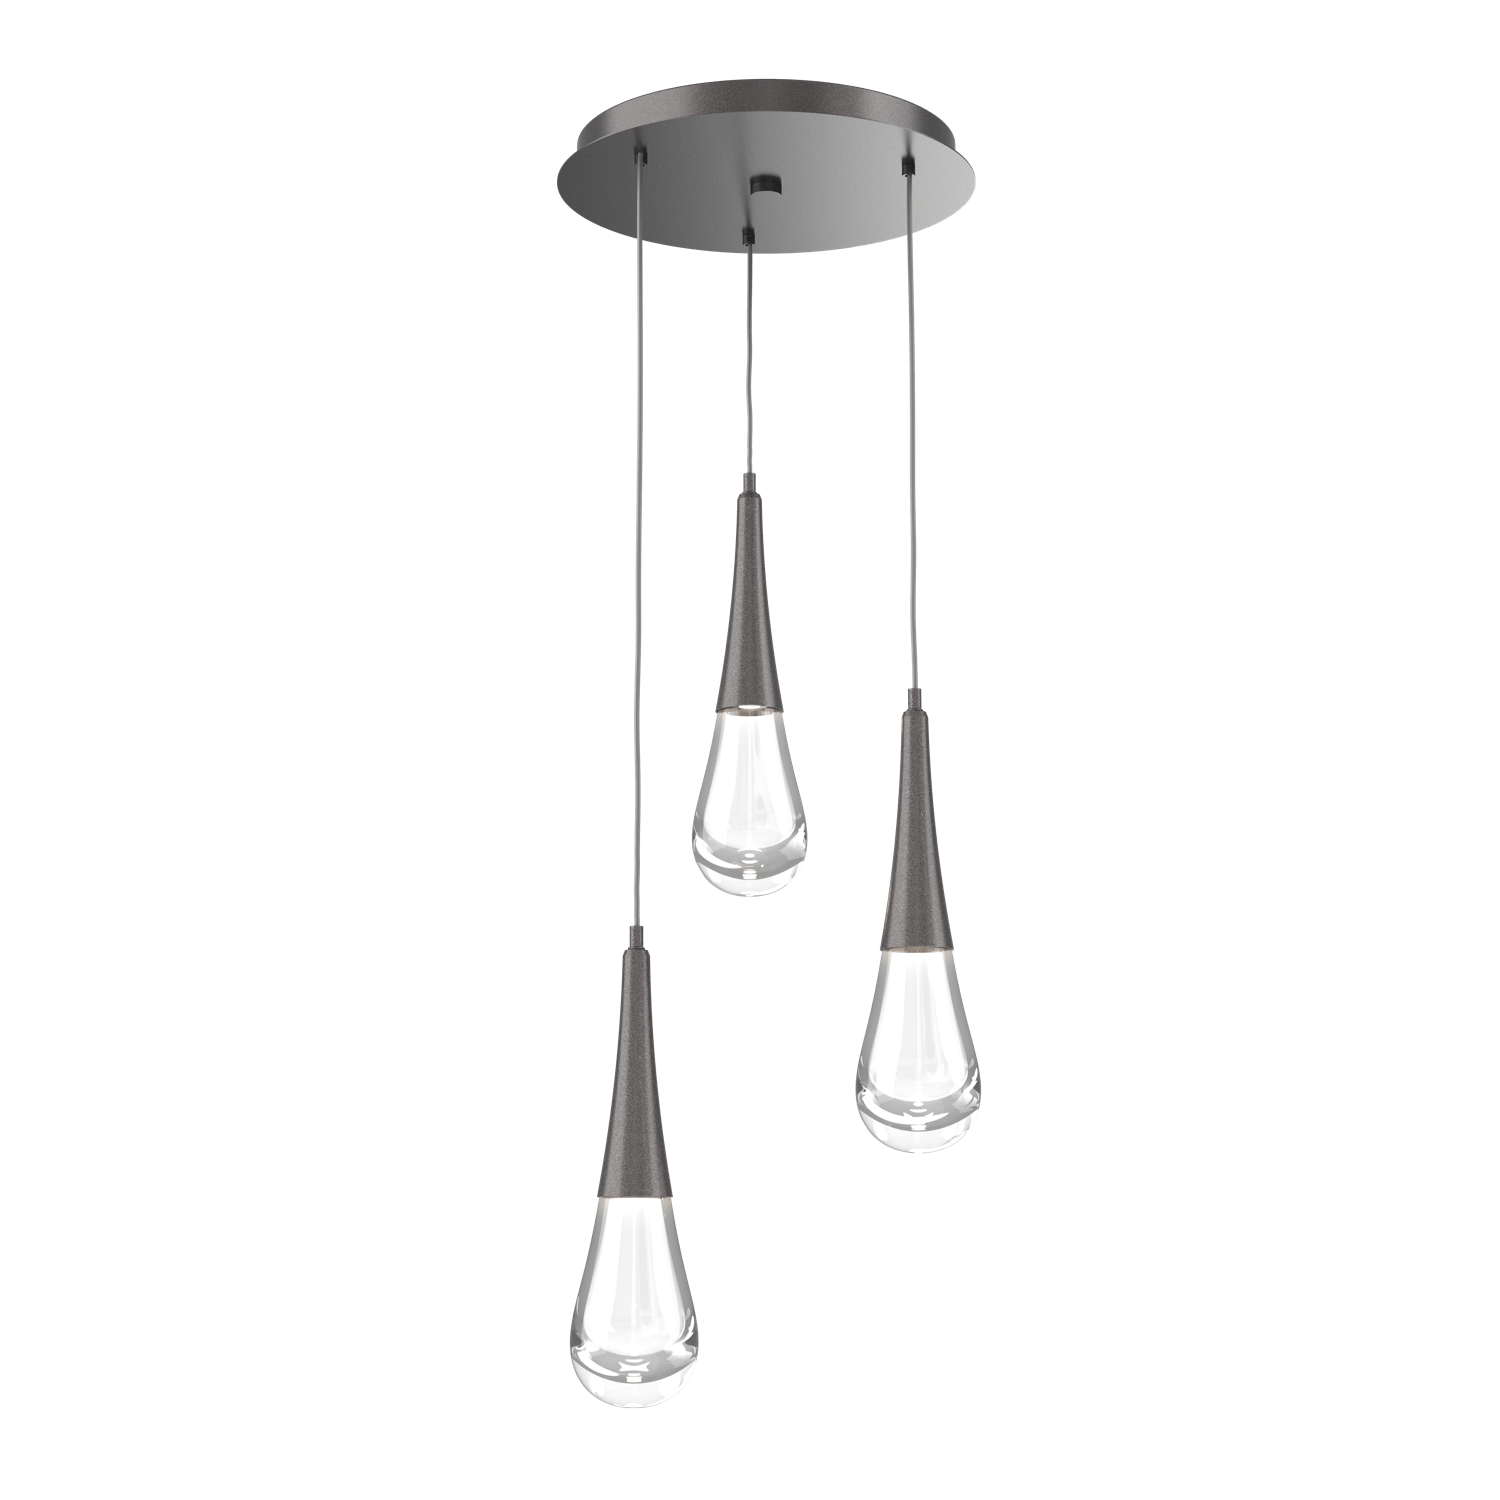 CHB0078-03-GP-Hammerton-Studio-Raindrop-3-light-round-pendant-chandelier-with-graphite-finish-and-clear-blown-glass-shades-and-LED-lamping